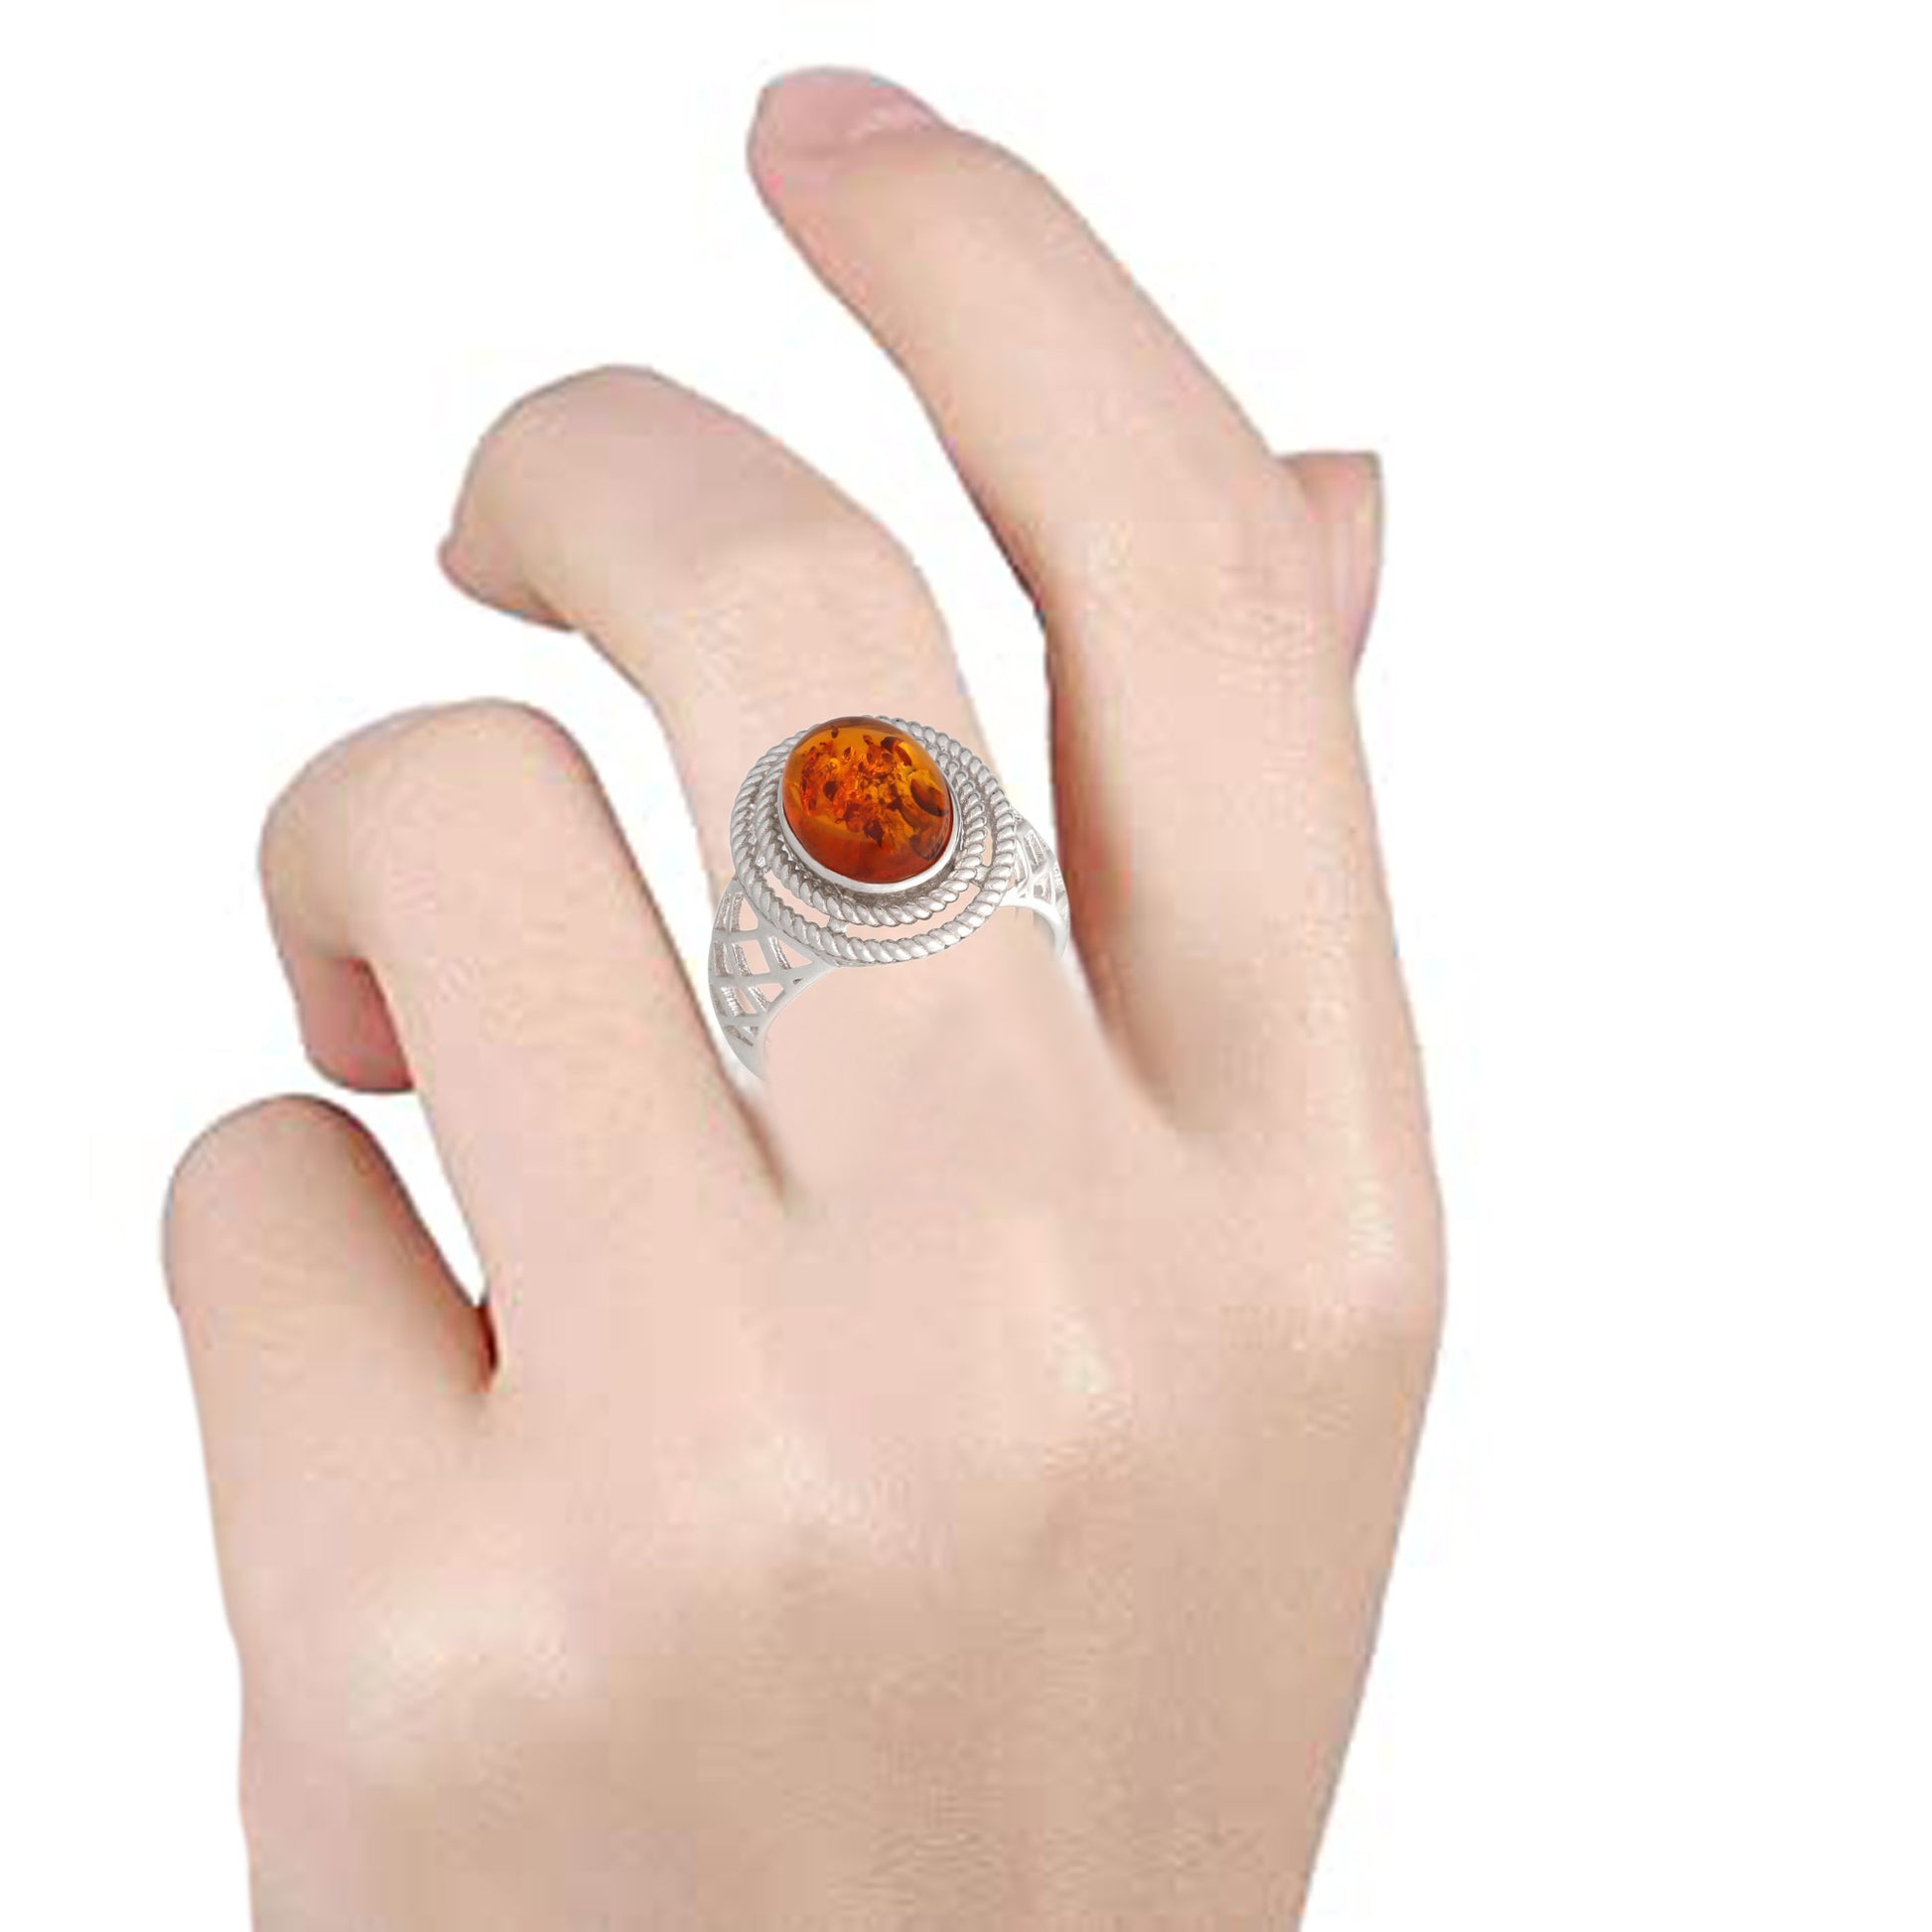 925 Sterling Silver Baltic Amber Ring - Pinctore